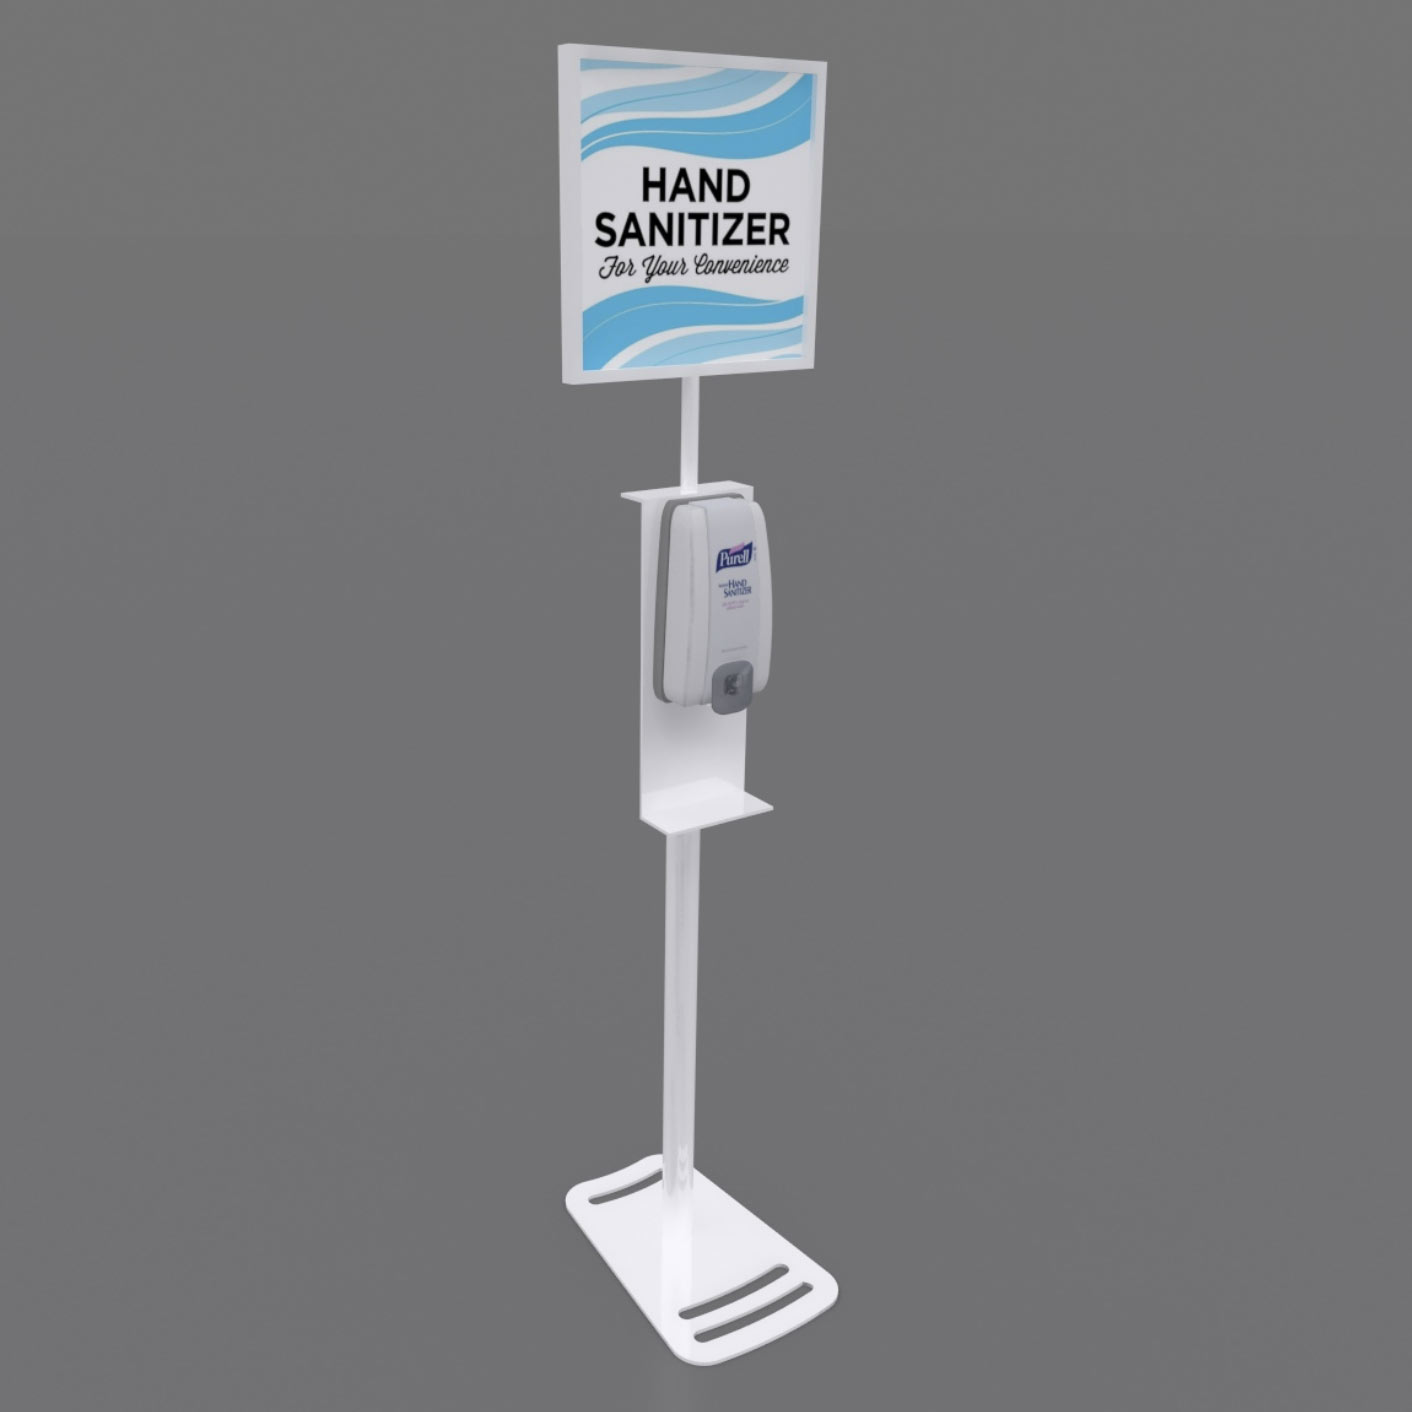 35 Sanitizer w/Adjustable Stand Ships FREE from USA 